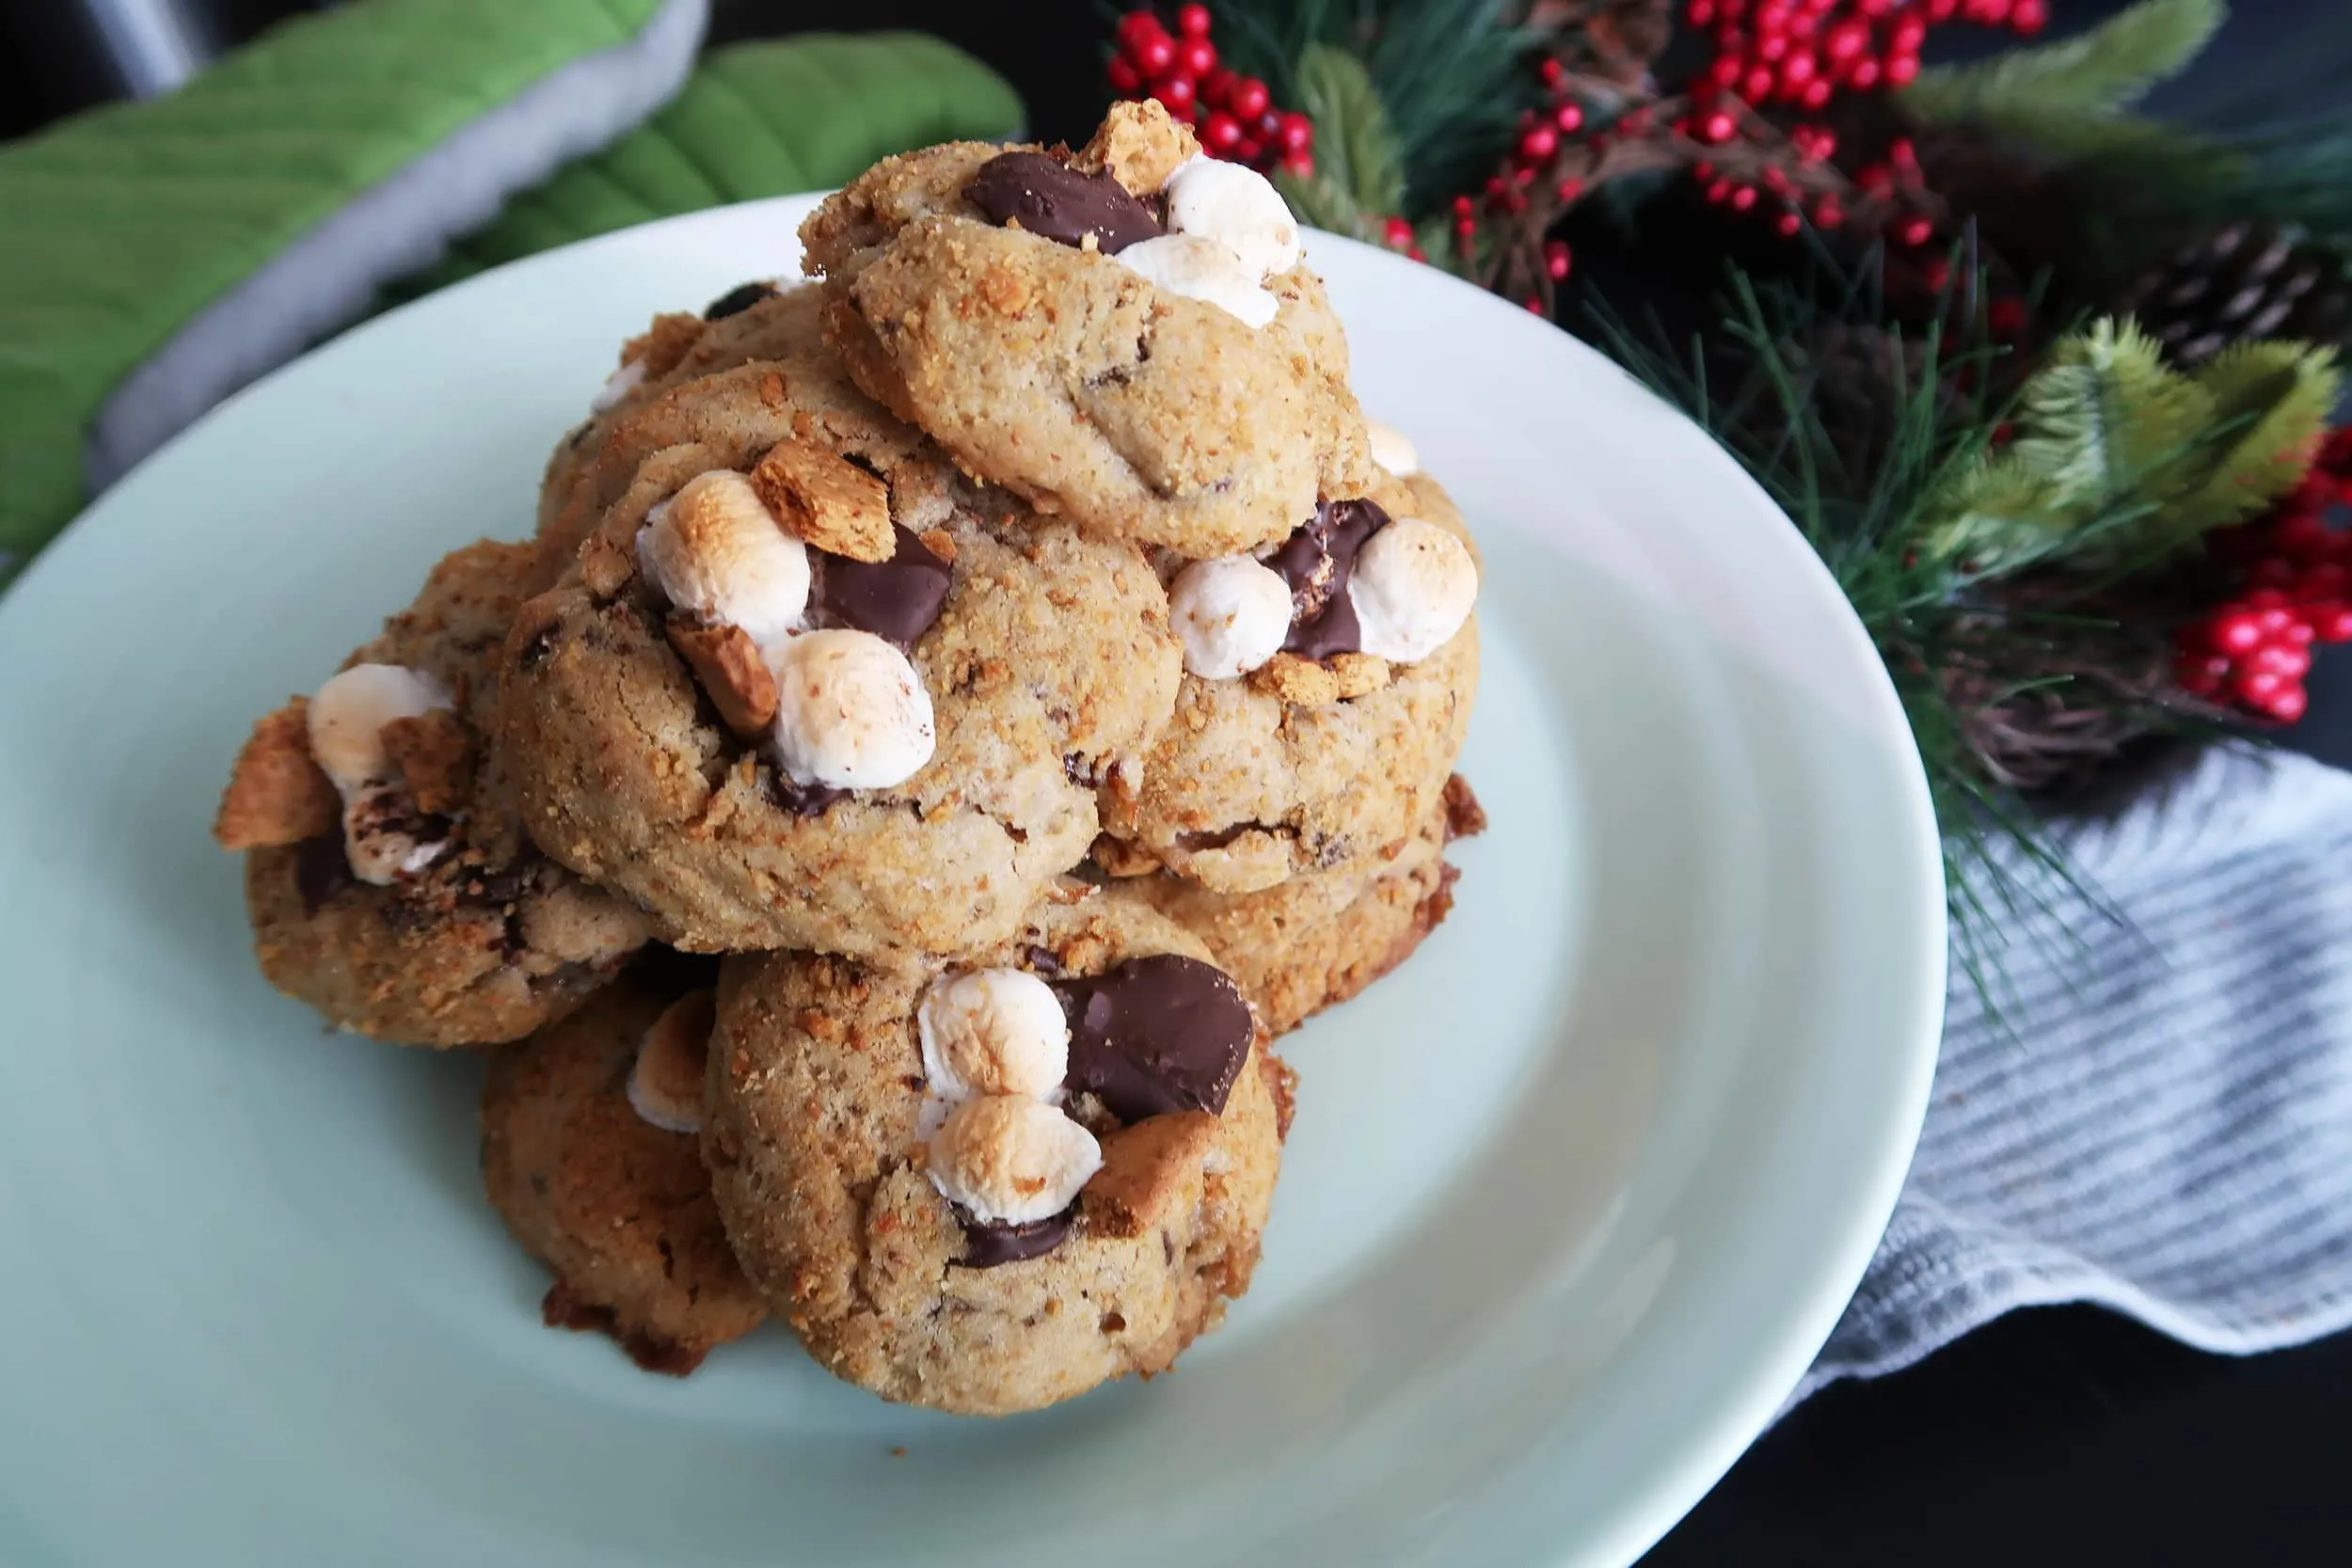 A pile of Soft and Chewy S'more Cookies on a plate.